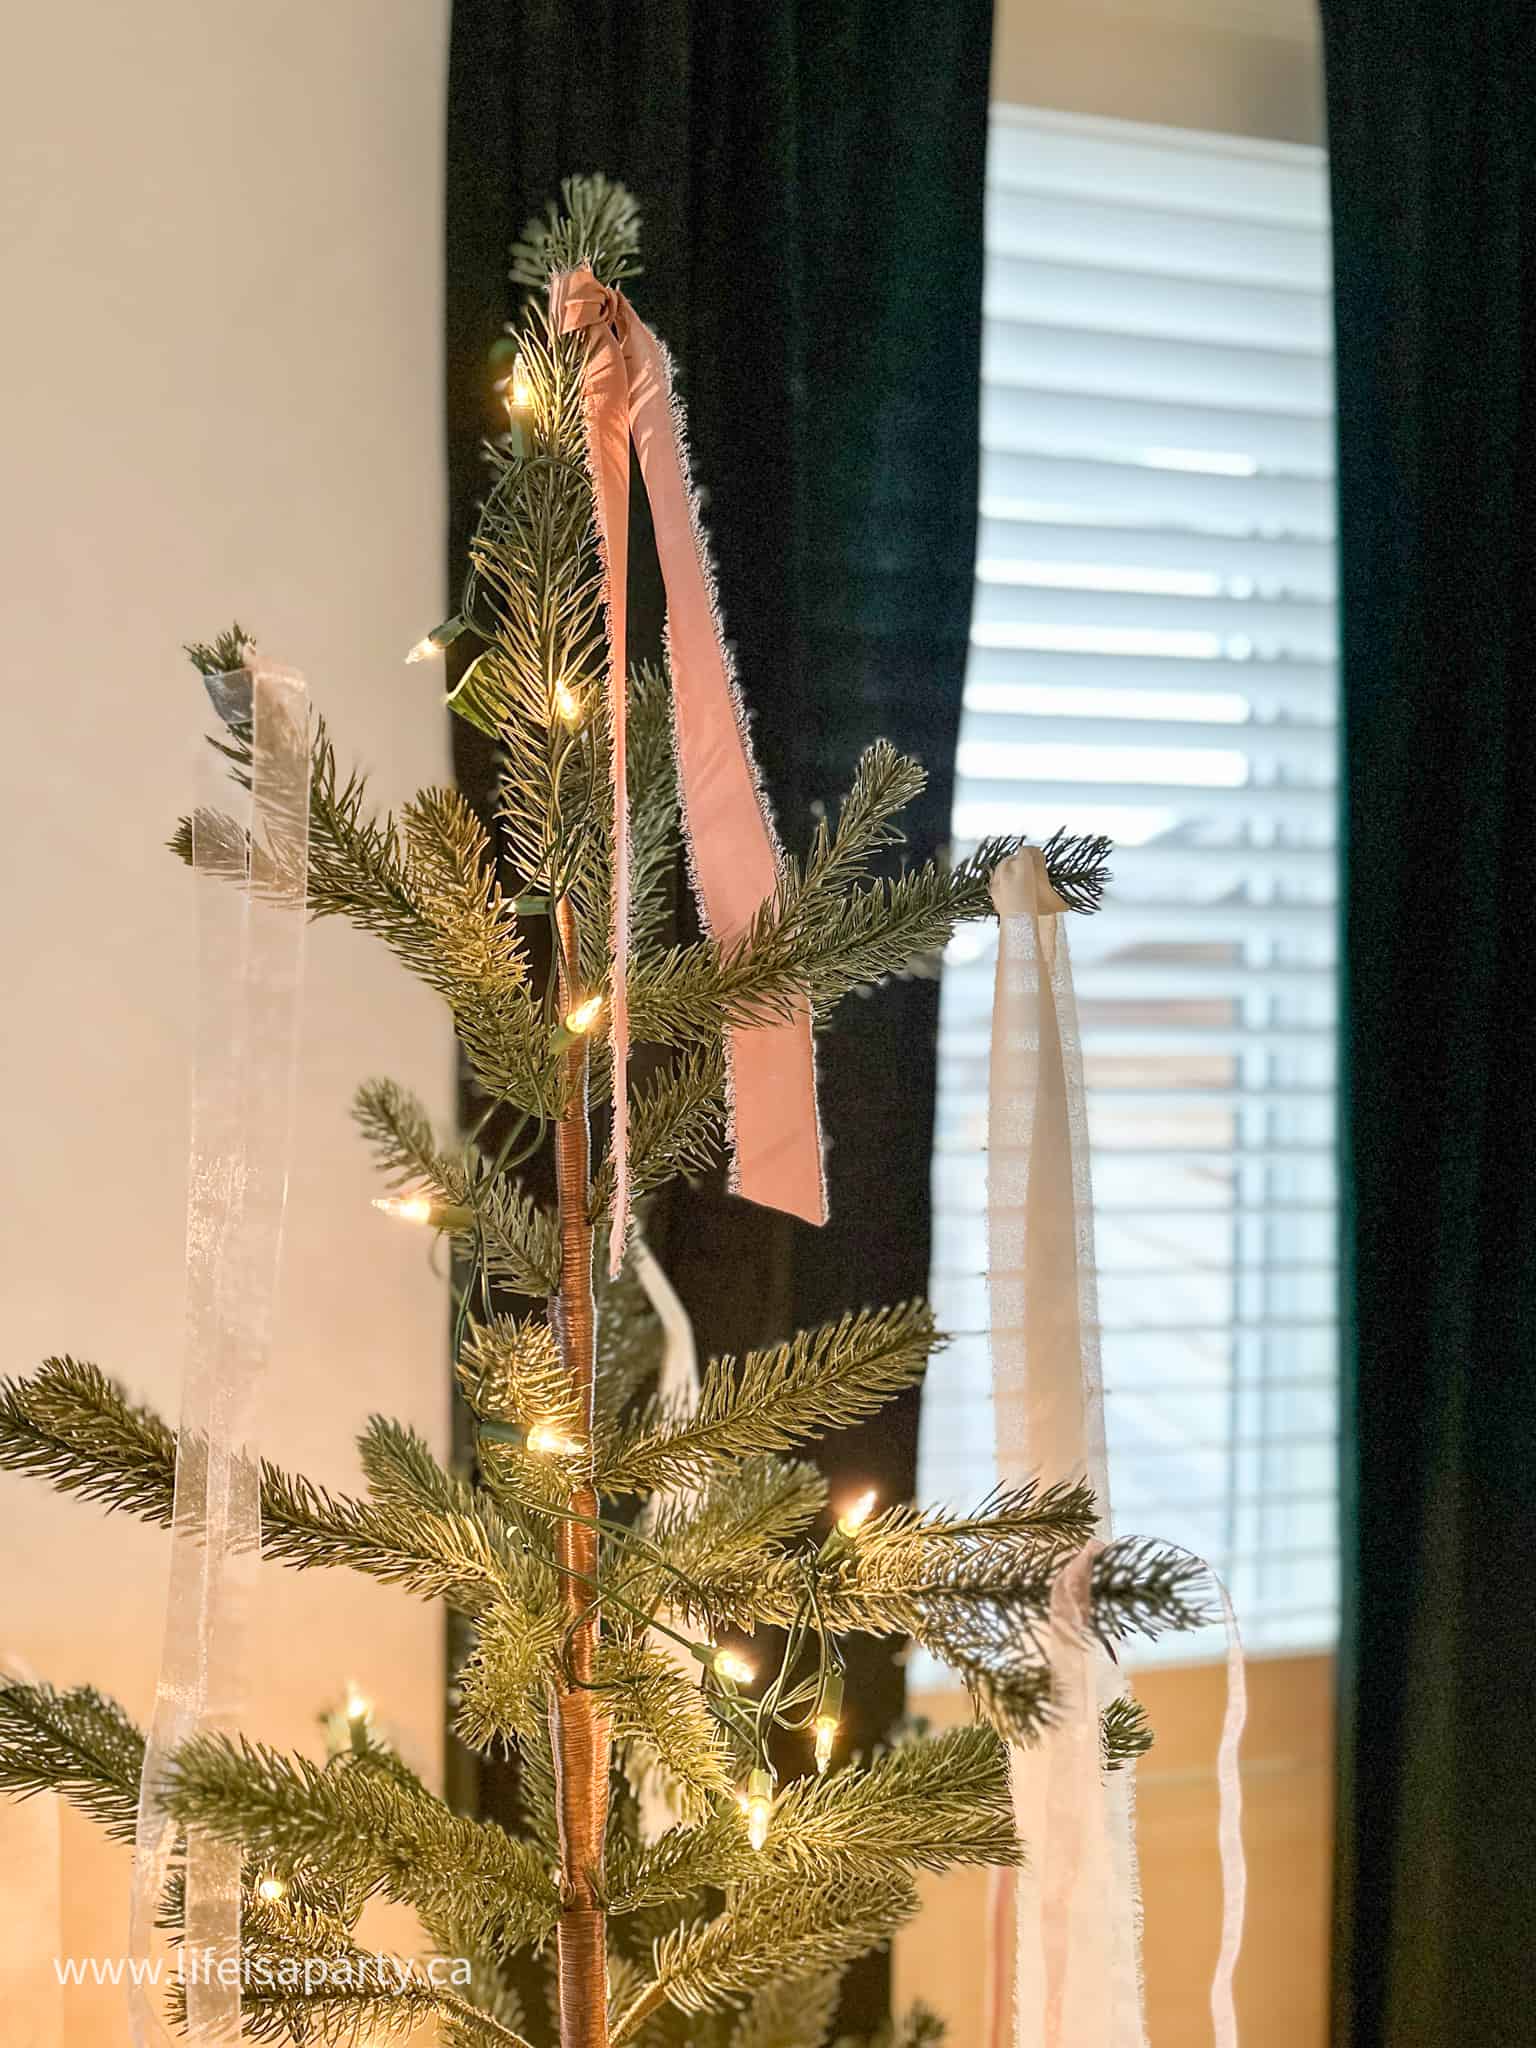 Christmas tree with ribbons